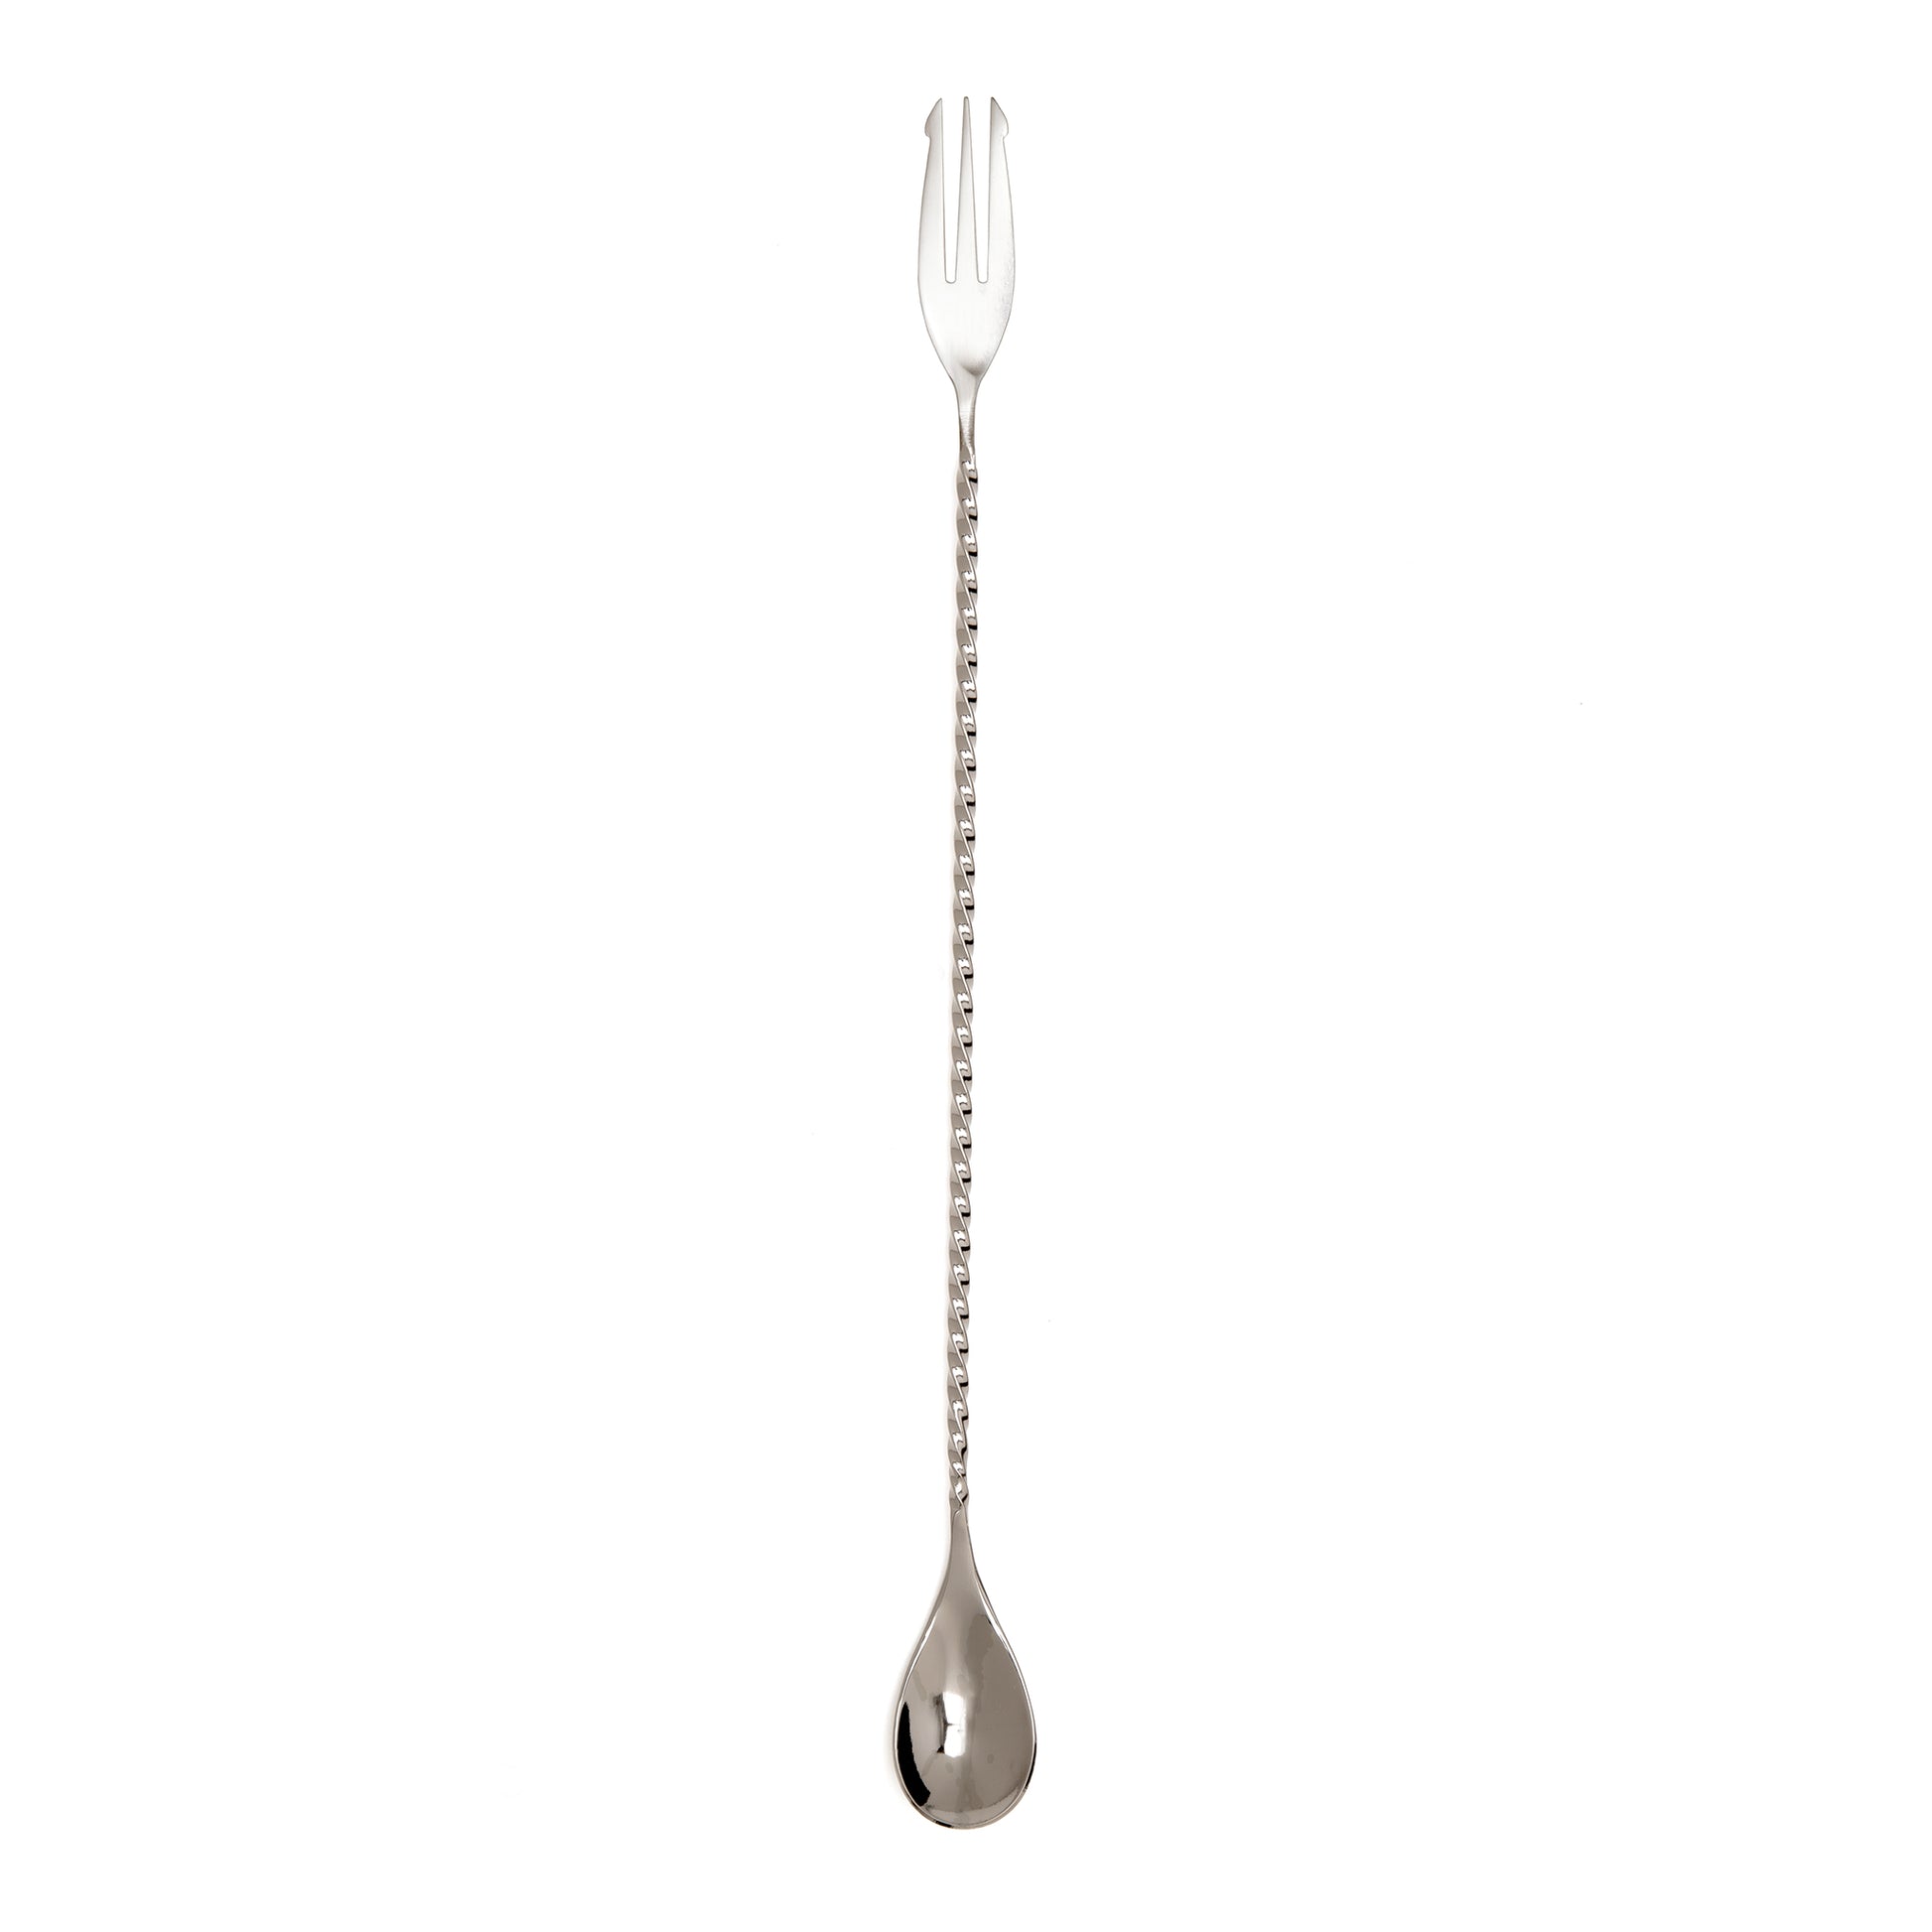 TRIDENT BARSPOON / STAINLESS STEEL / 31.5cm